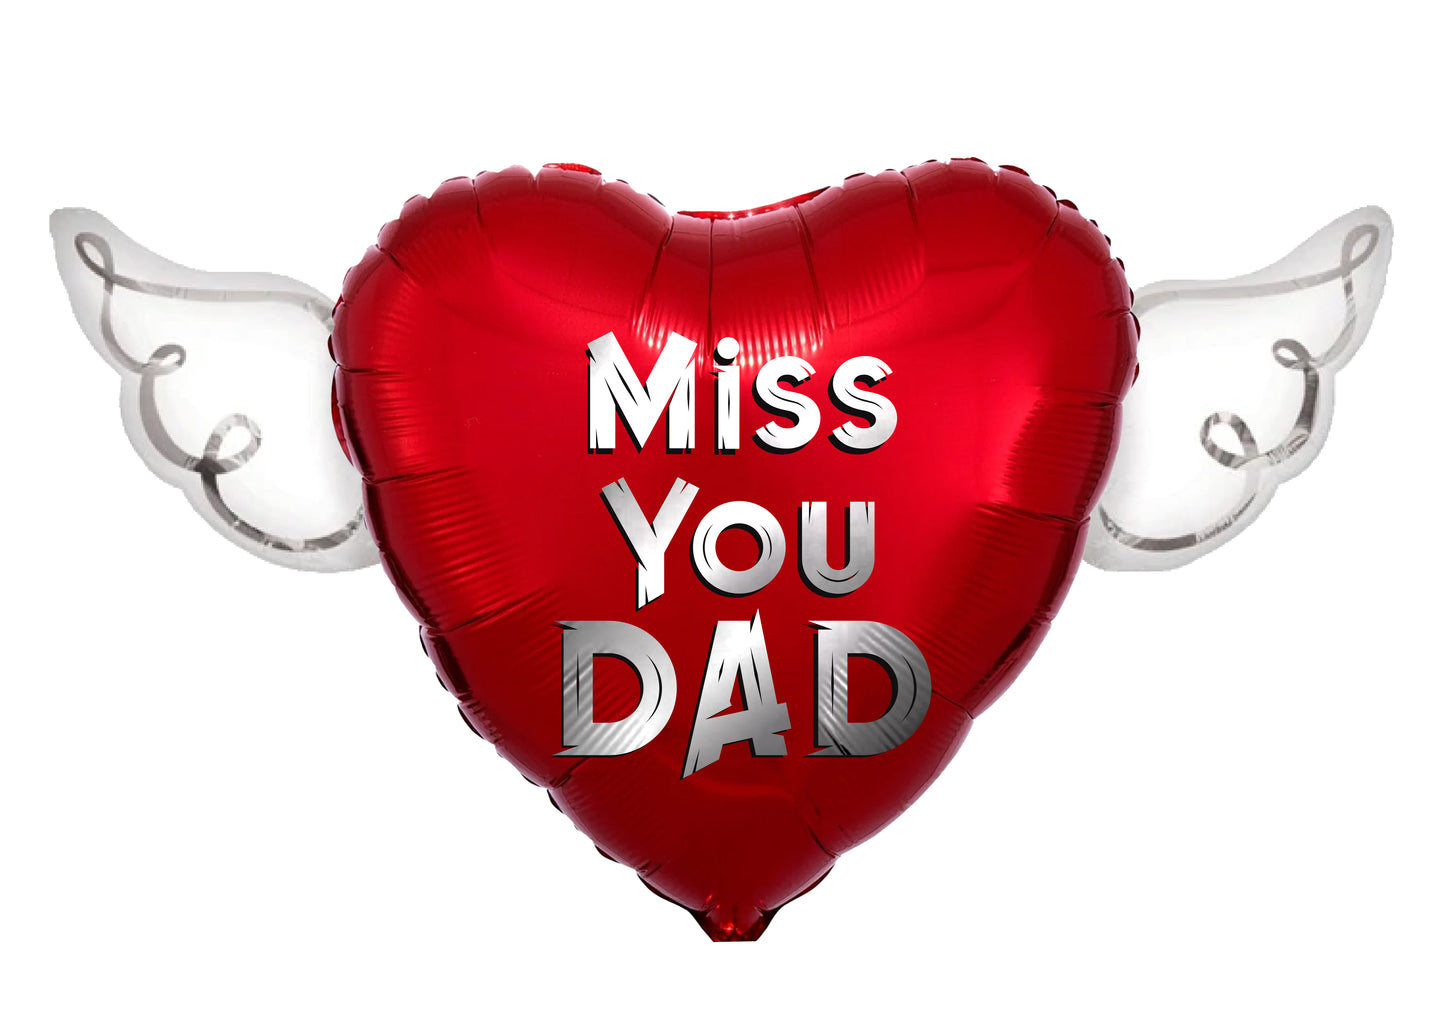 MISS YOU DAD Heavenly Balloons ® Heart Shaped with angel wings ...